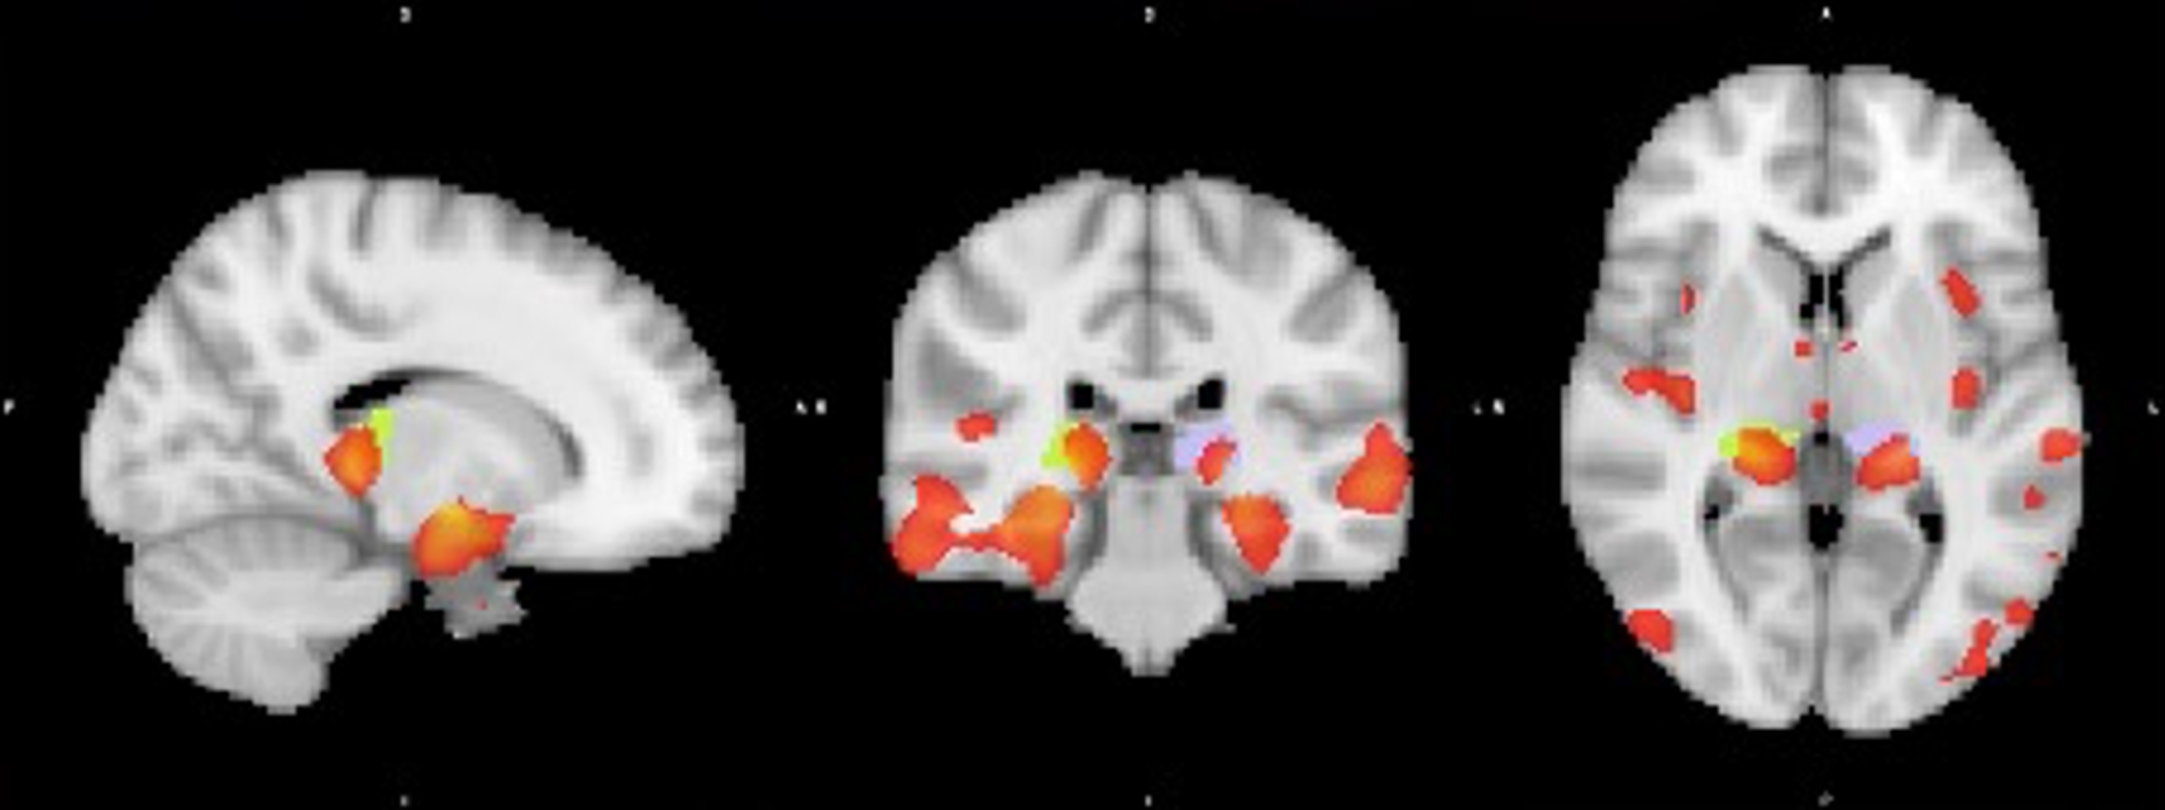 Visualization of GM volume reduction cluster (red) in AD dementia converters located in the bilateral hippocampus and left (purple) and right (yellow) posterior thalamus/pulvinar according to the Talairach structural atlas.